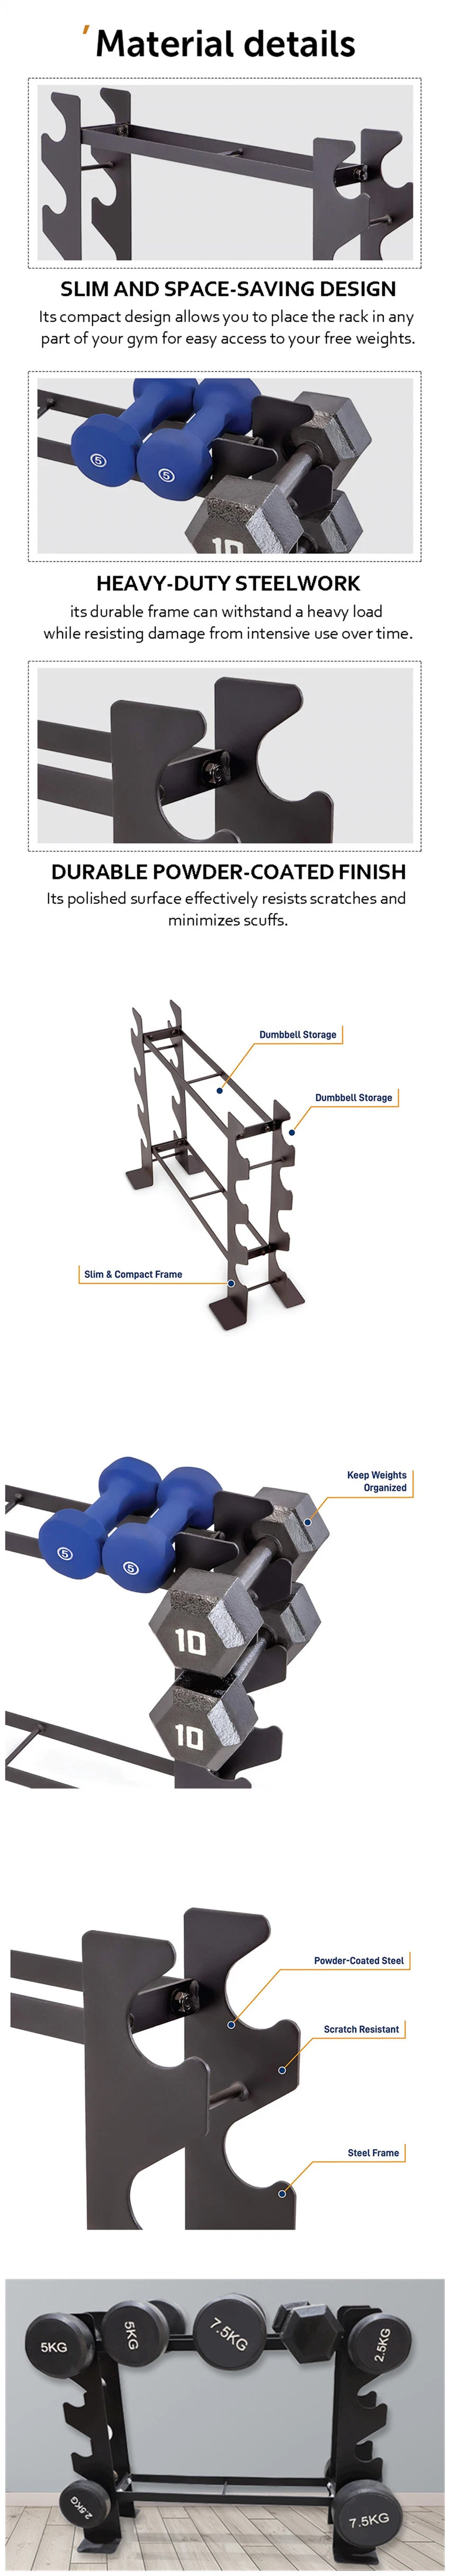 Home Use Free Weight Stand Gym Dumbbell Set Rack Multilevel Weight Storage Space Saving Dumbbell Stand